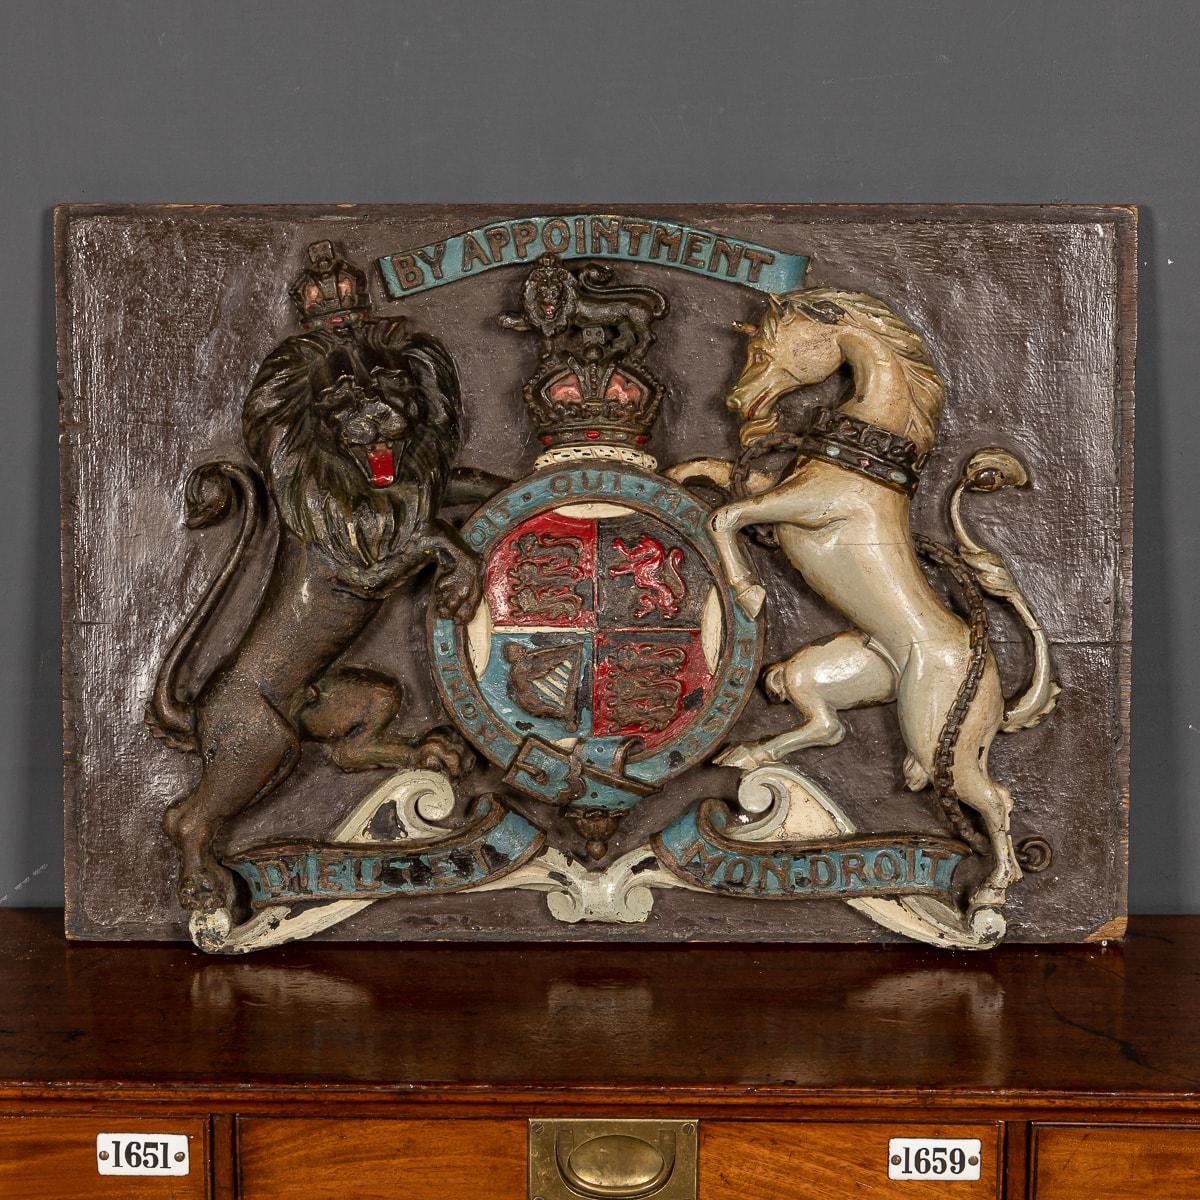 Antique 19th Century Victorian large and impressive, beautifully hand painted English Royal Warrant. This hand carved wooden royal warrant of appointment was given to tradespeople who supply goods or services to the royal court or royal personages,